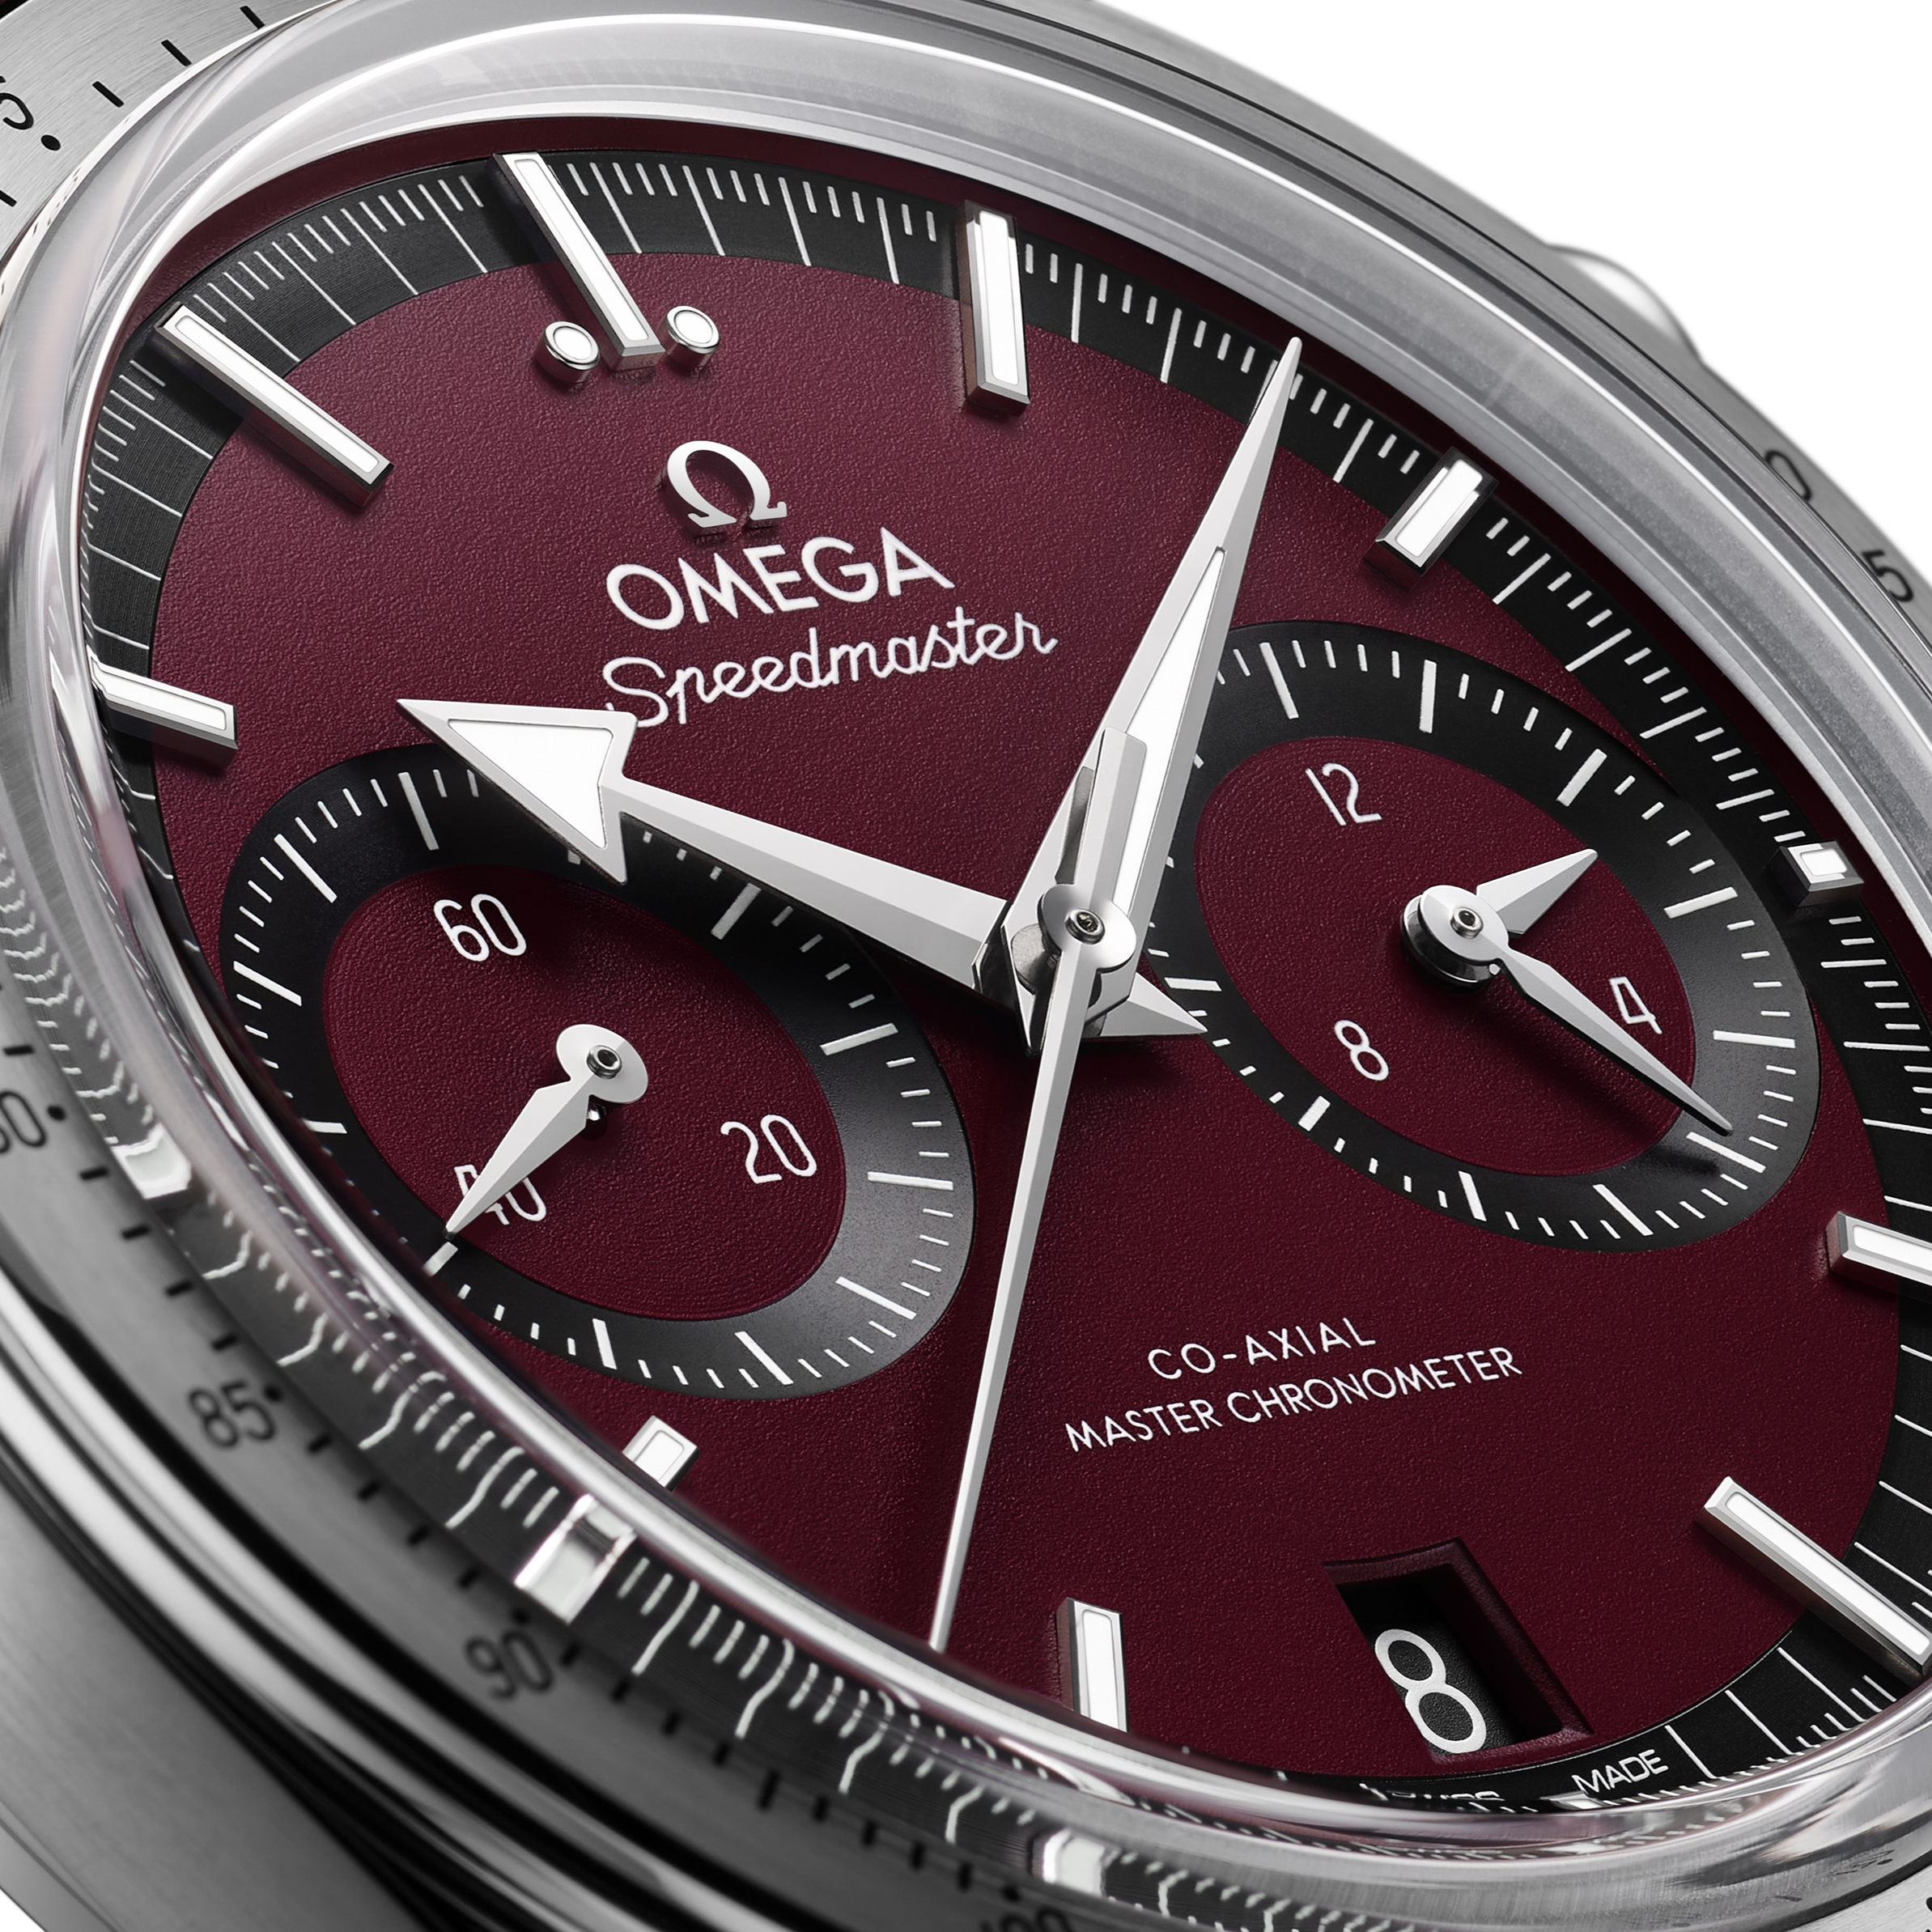 Smaller, Colorful, and Very Retro: Omega’s Latest ’57 Speedmaster